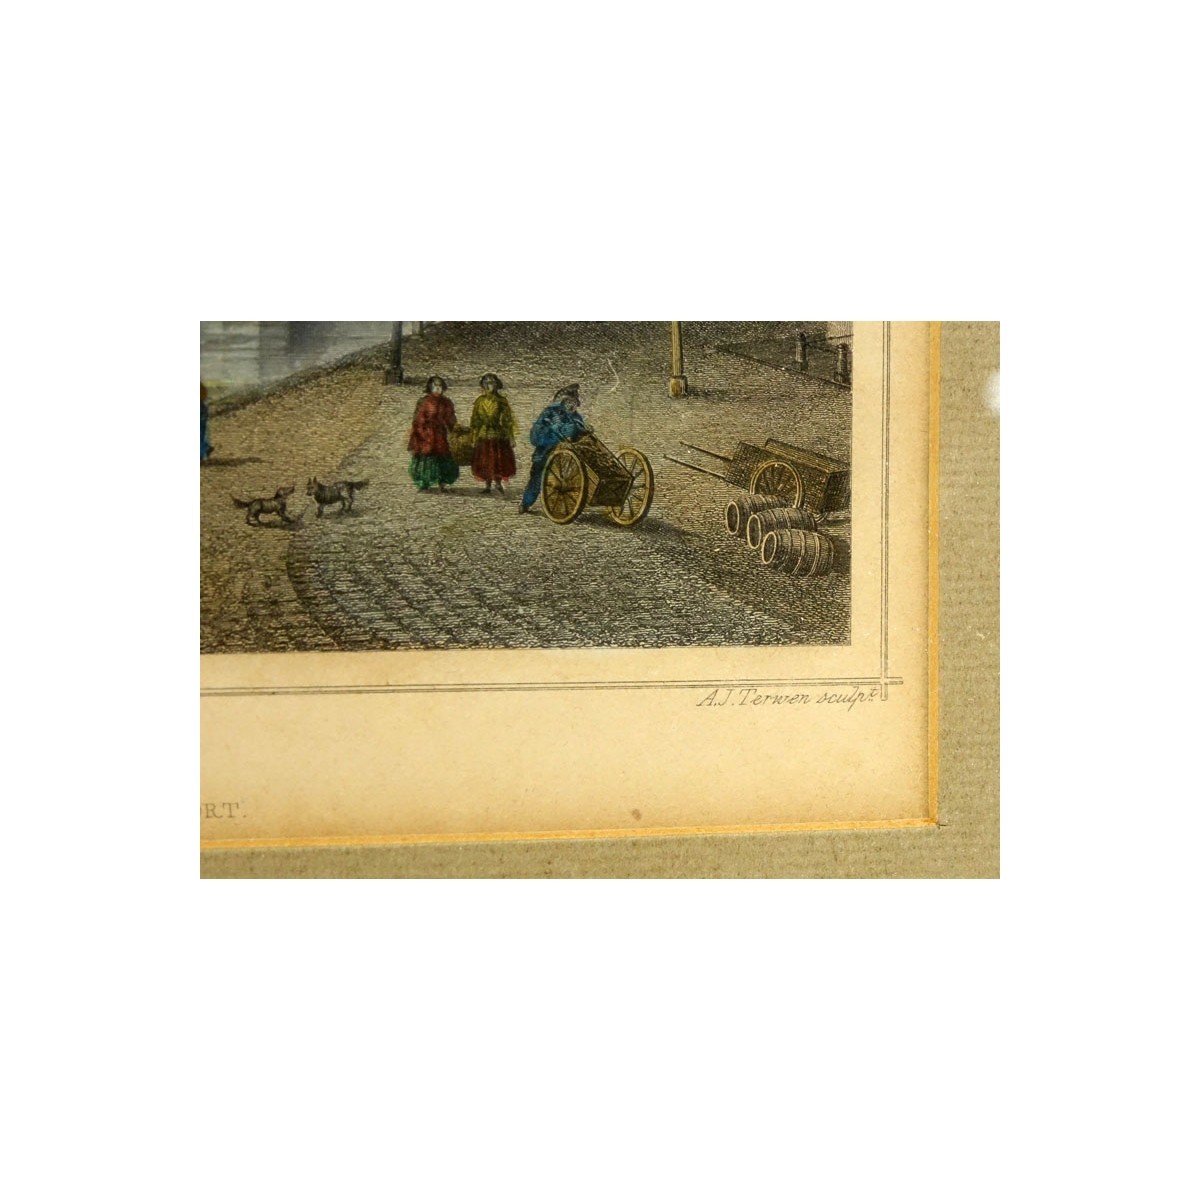 Two (2) Antique Engravings View of Nootdorp